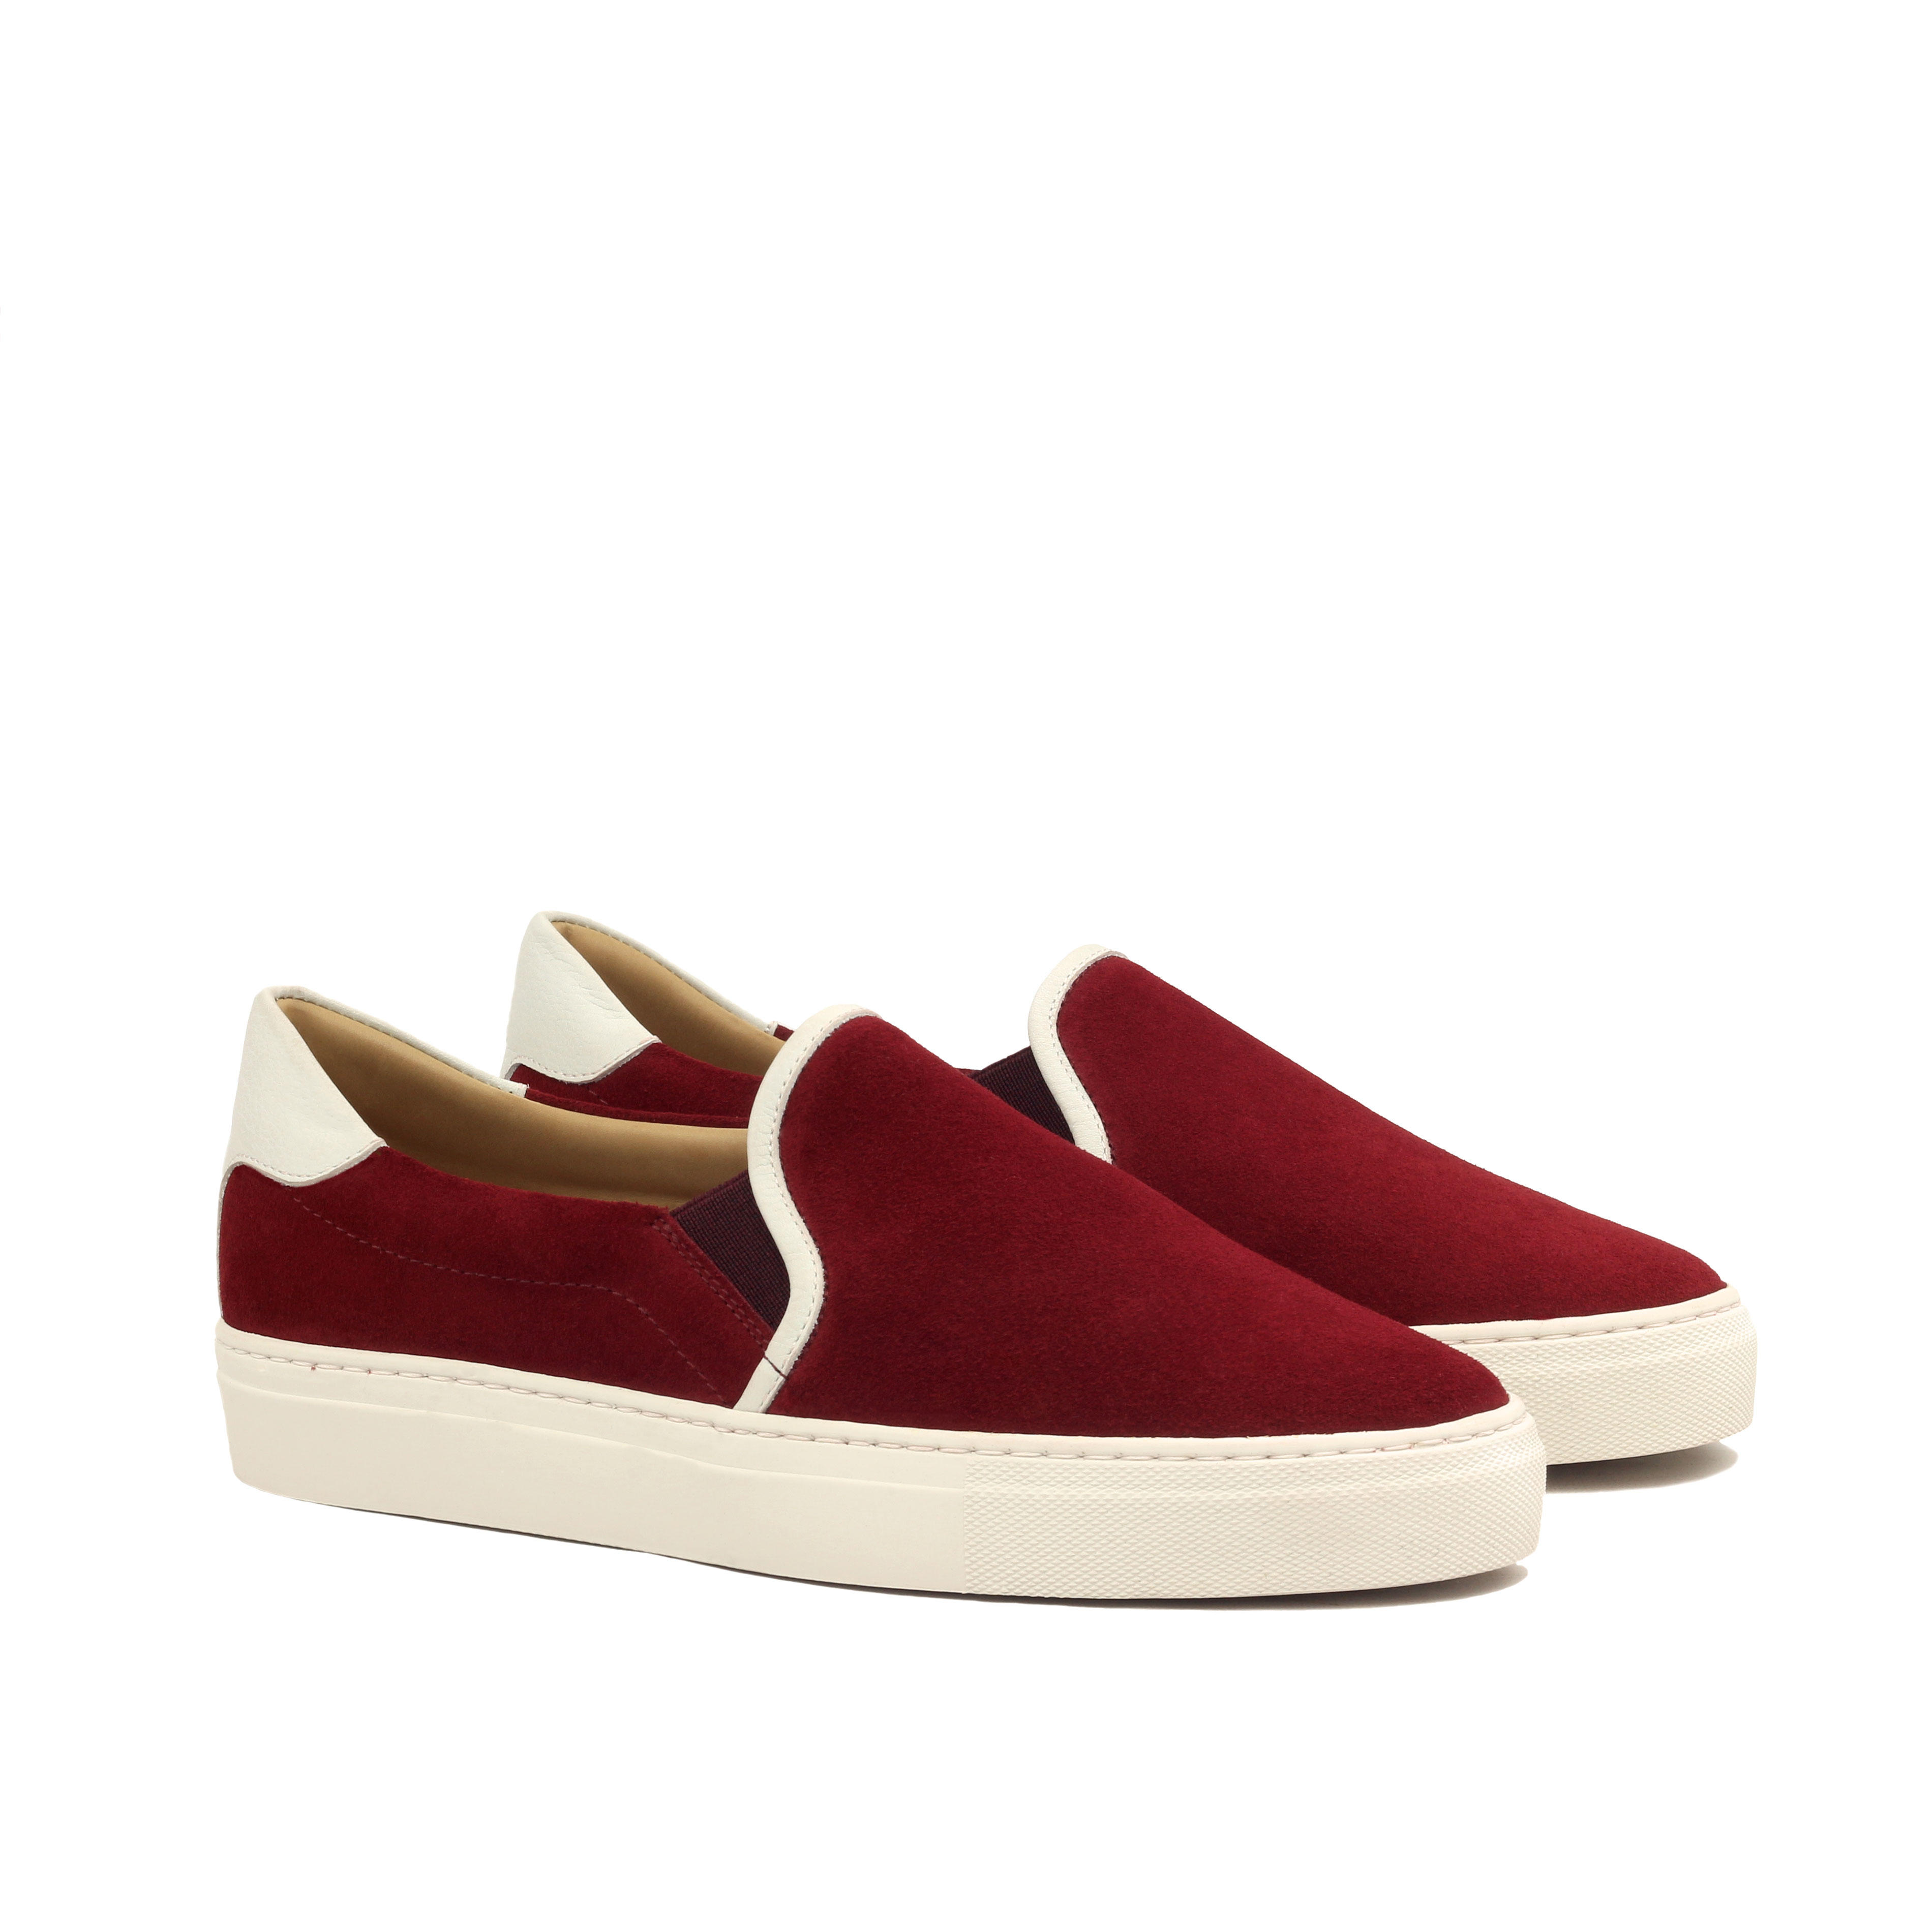 MANOR OF LONDON 'The Skater' Burgundy Suede Slip On Trainer Luxury Custom Initials Monogrammed Front Side View